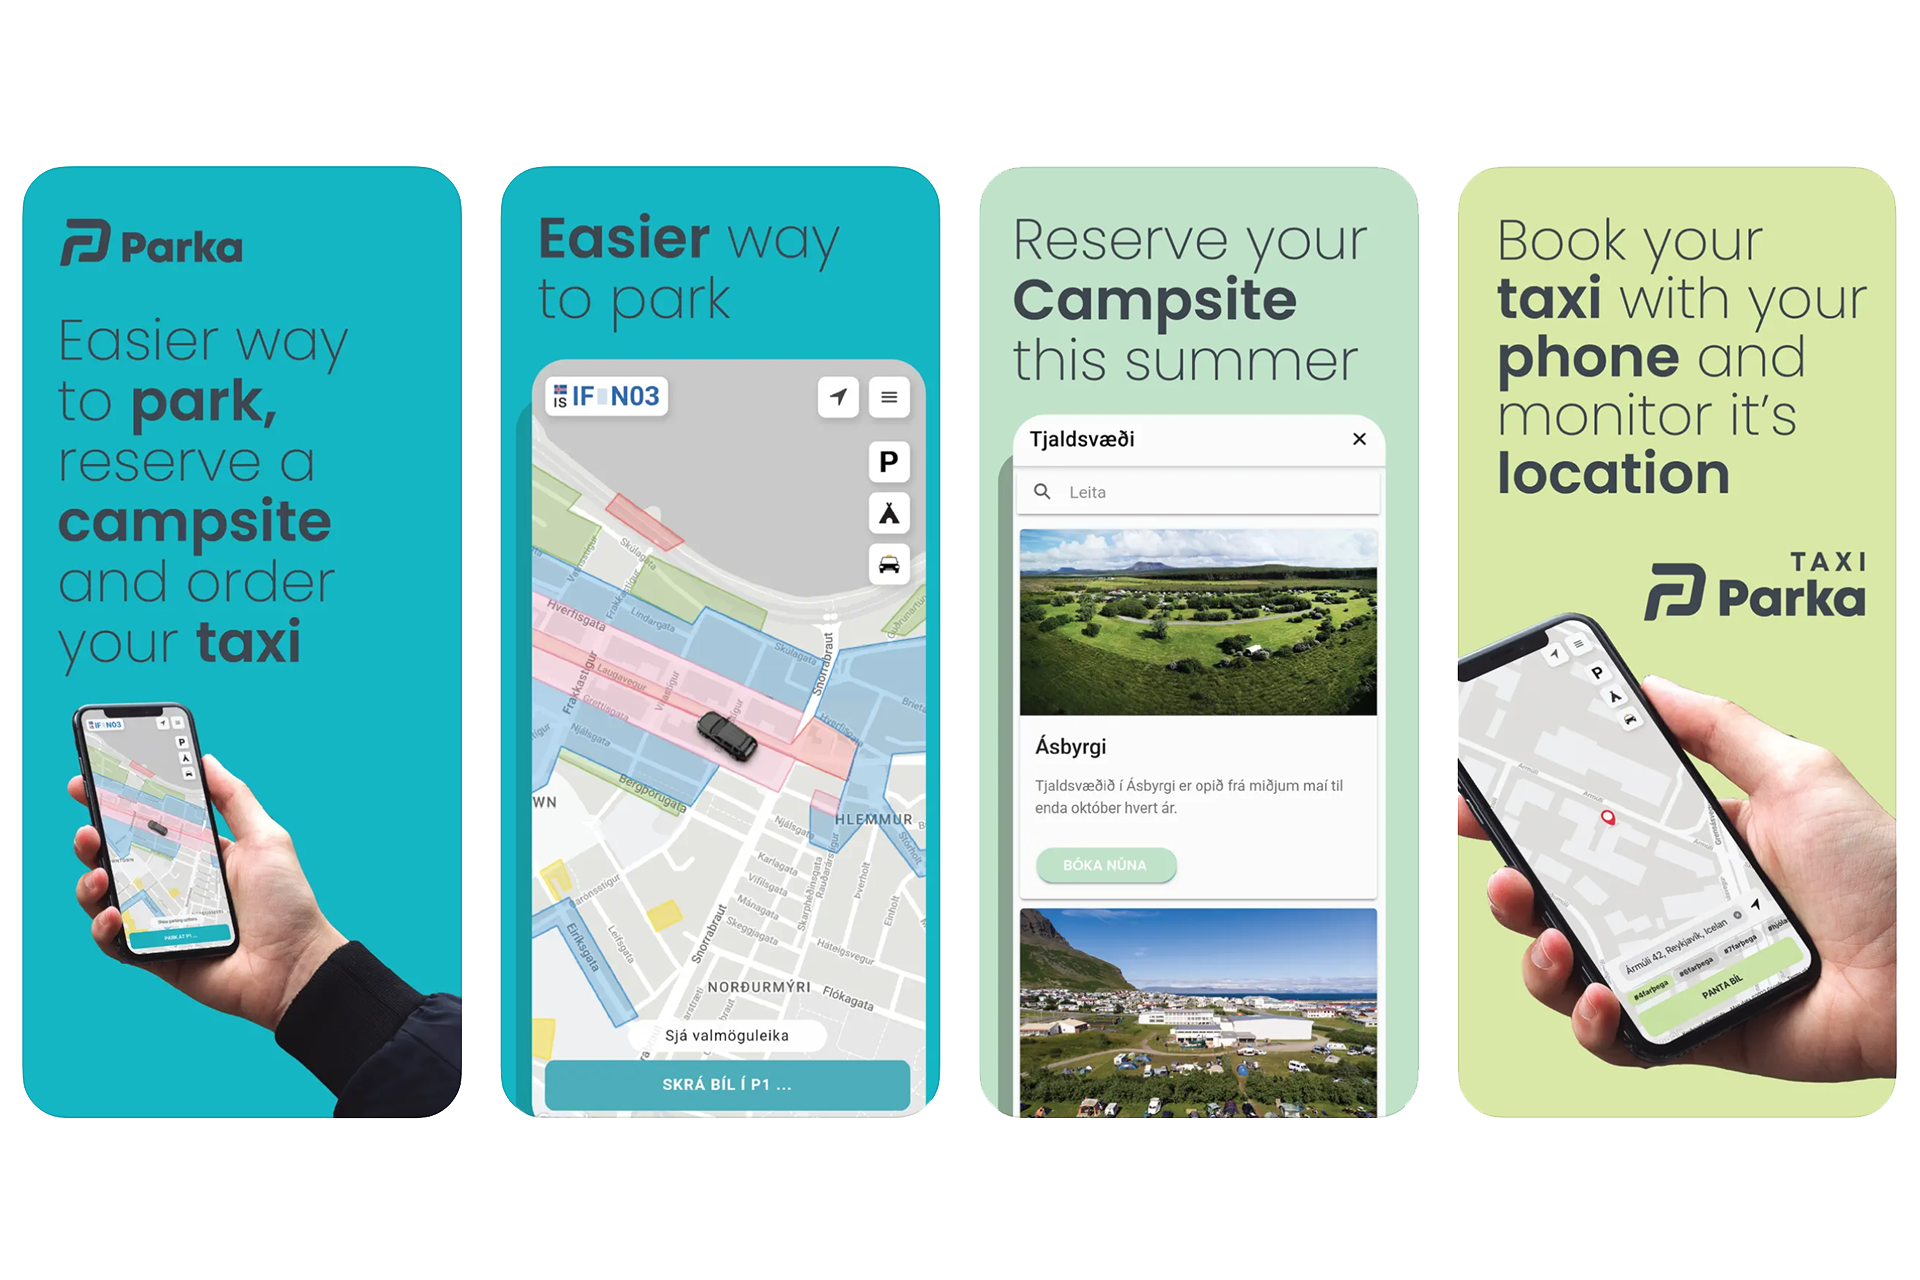 Parka app offers users a simple and fast way to pay for parking within the city of Reykjavík and in Icelandic national parks.